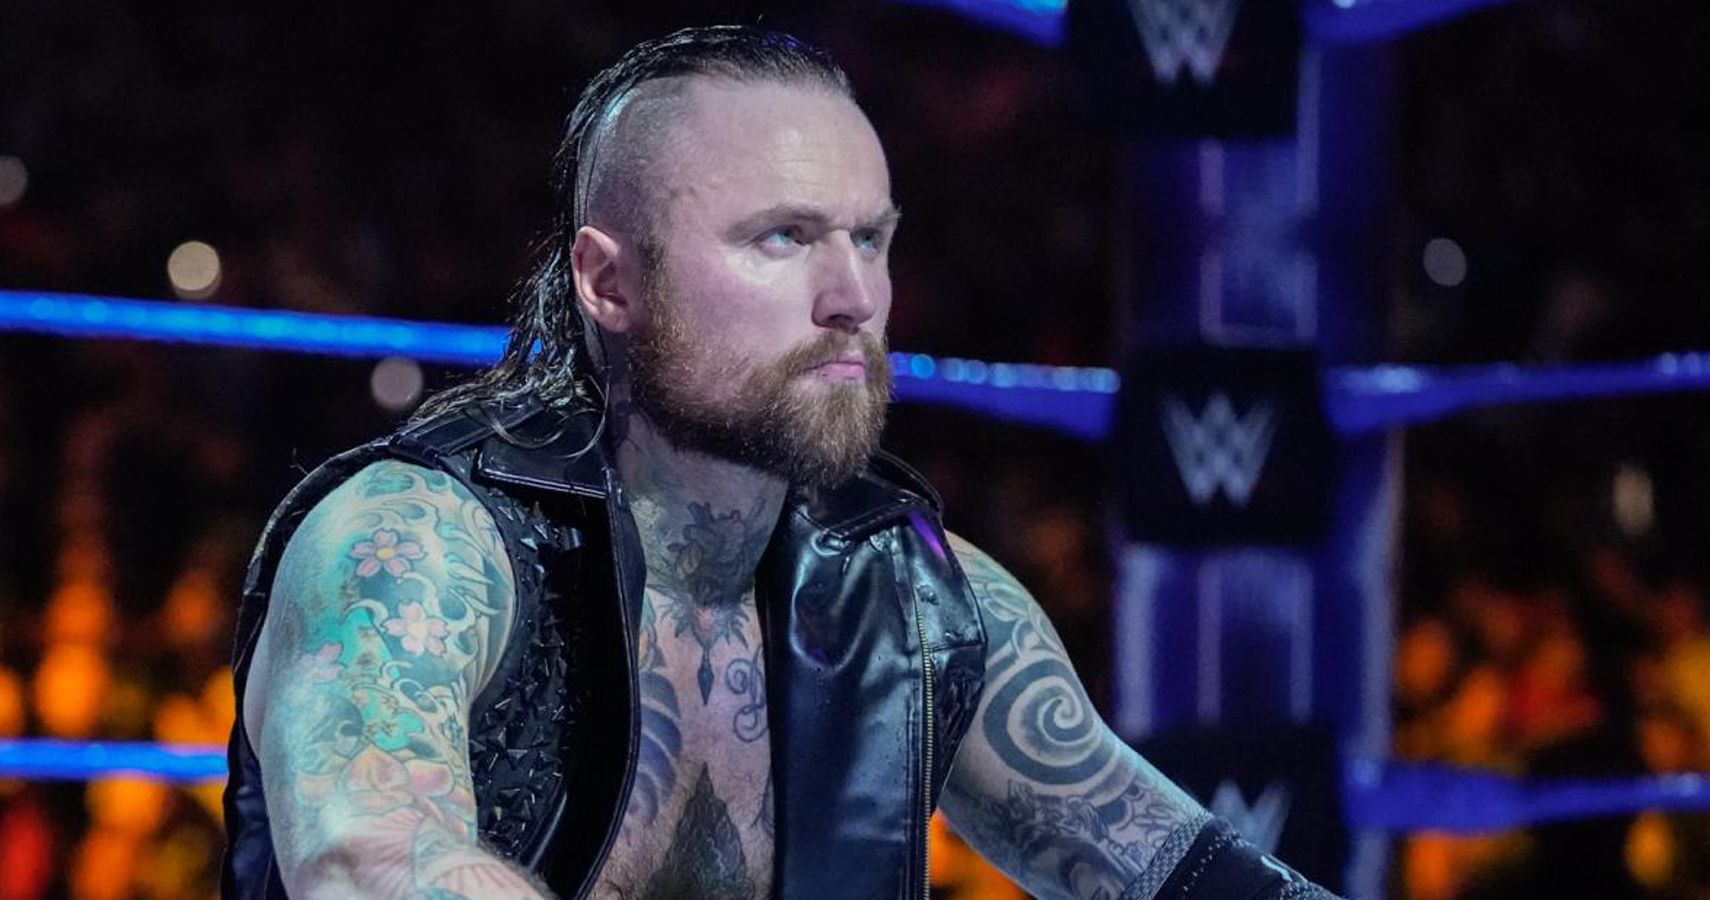 Aleister Black poses in the ring